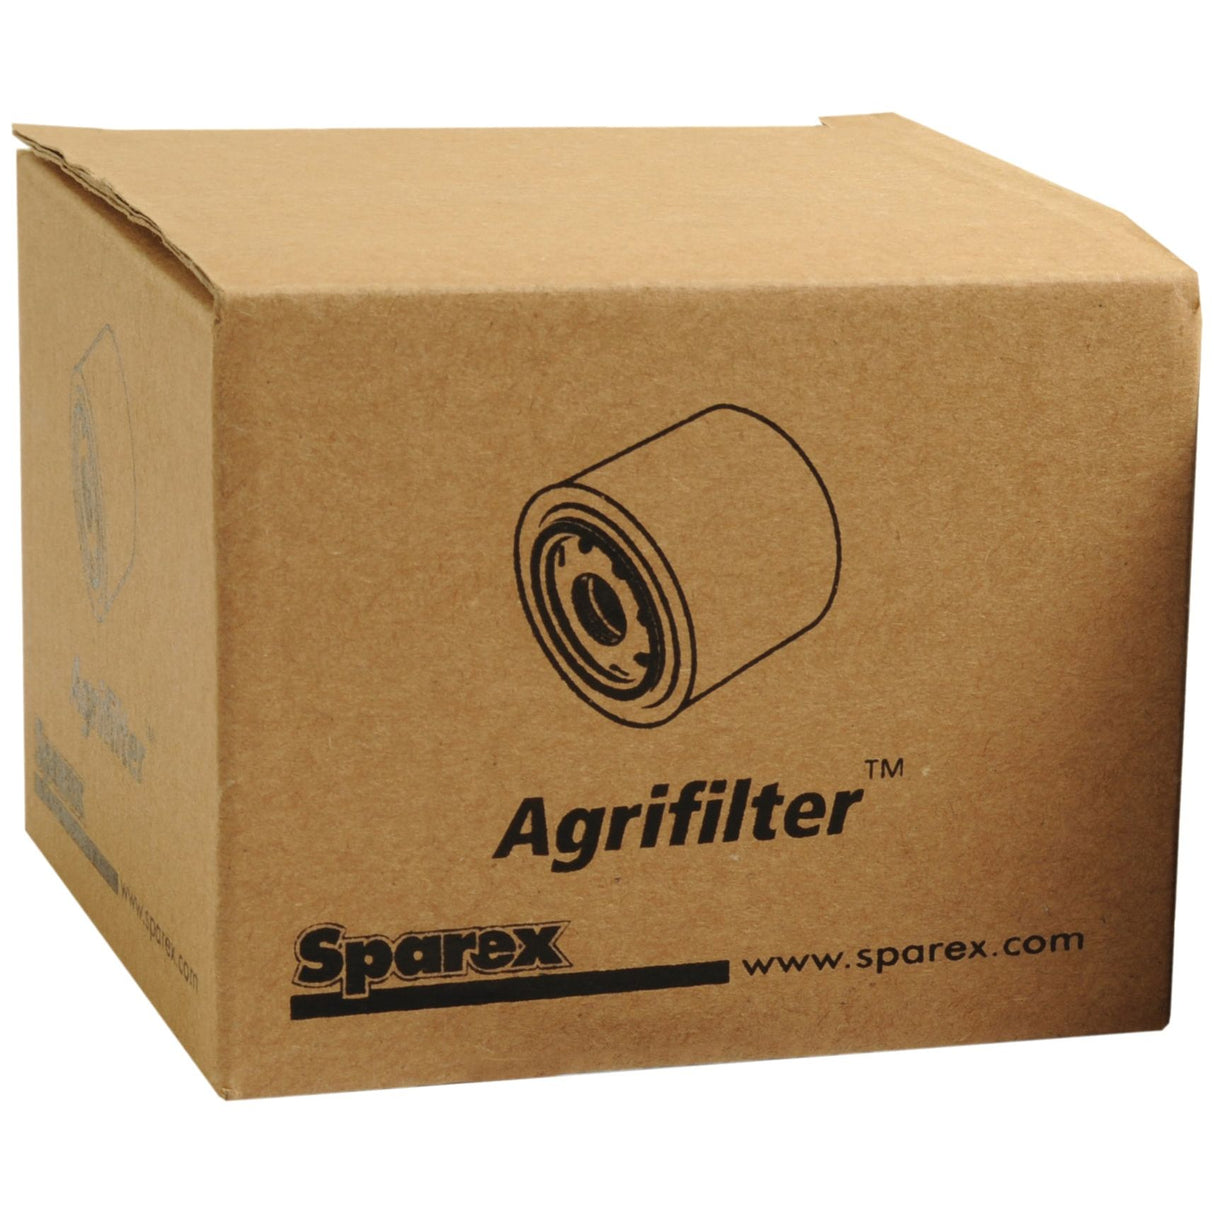 Fuel Separator - Spin On -
 - S.109644 - Farming Parts